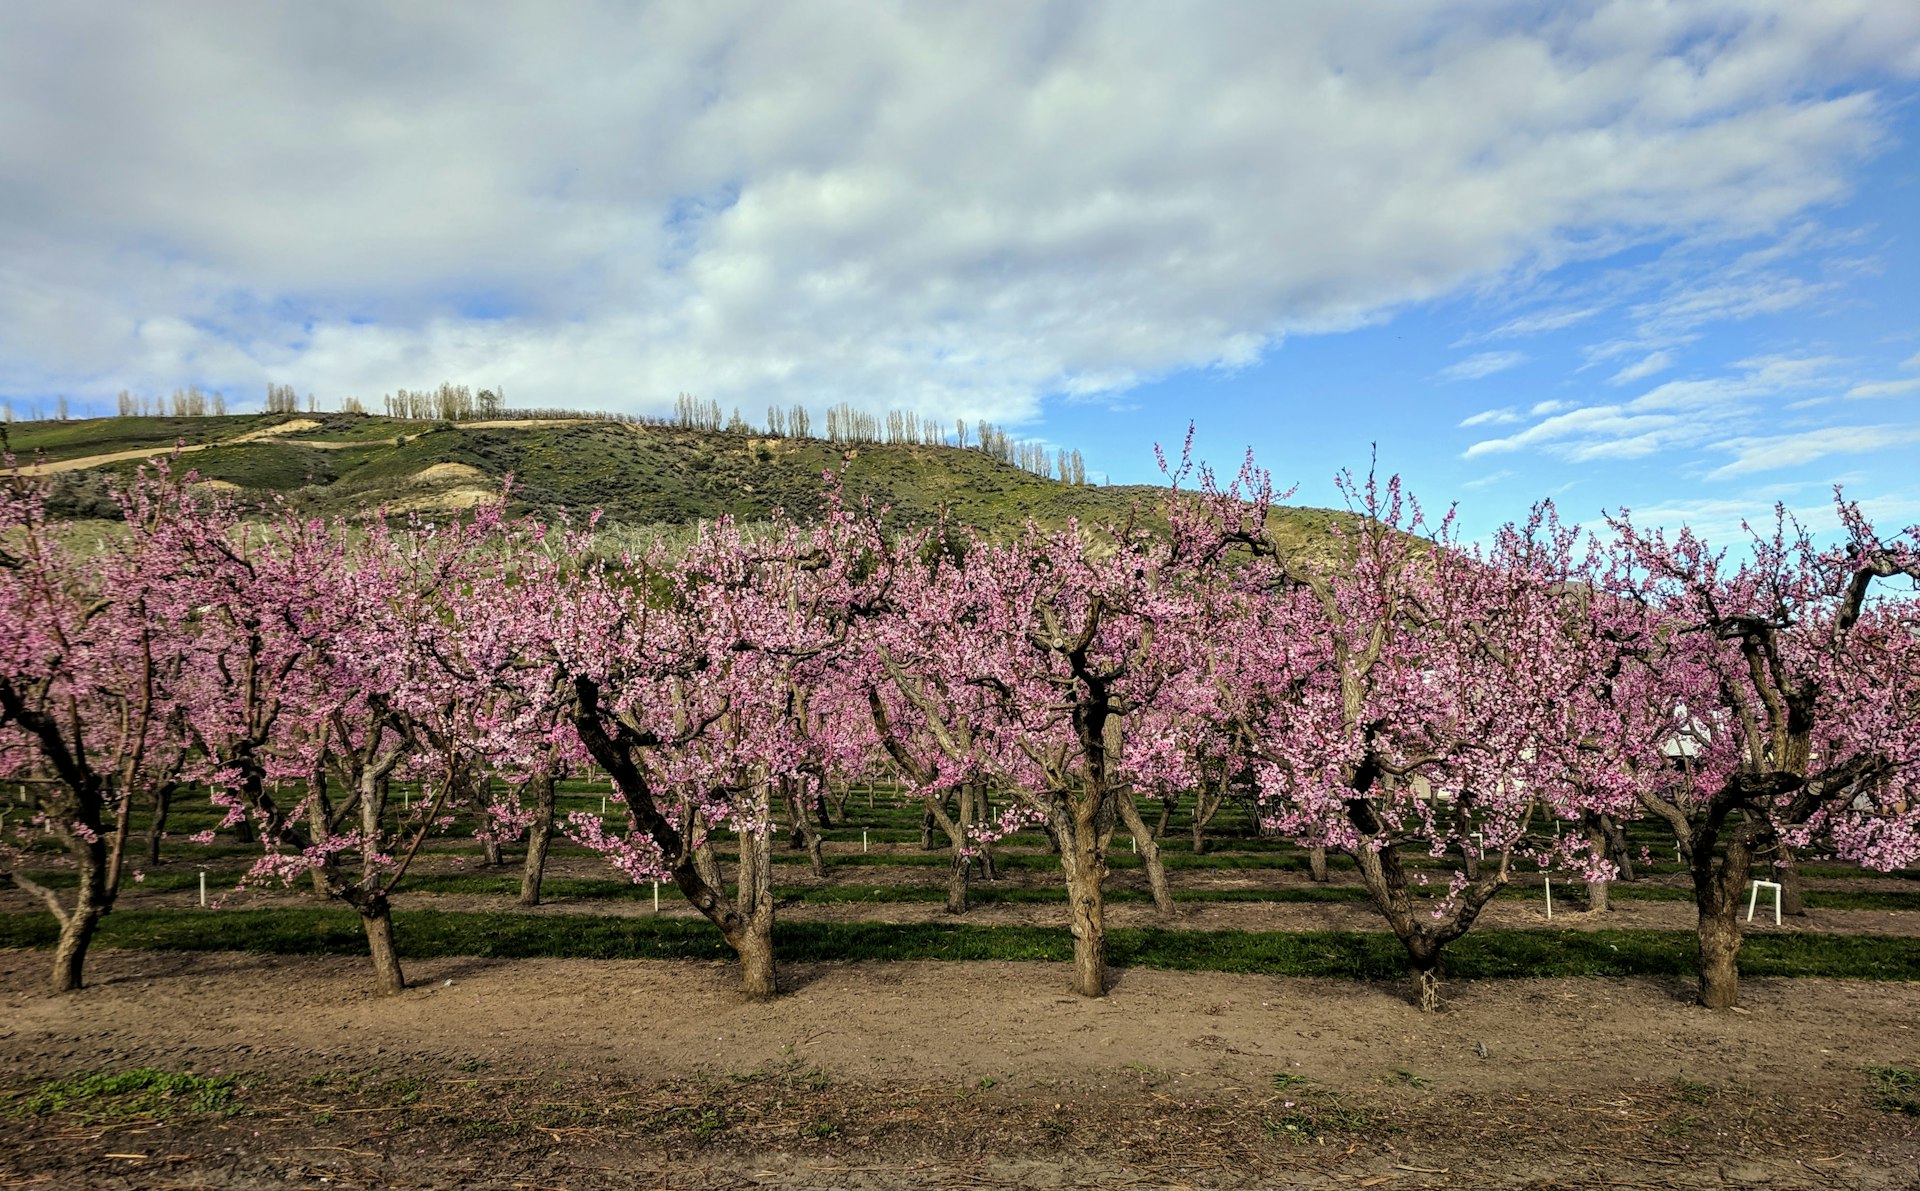 Pink fruit tree blossoms line a roadside in the Pacific Northwest